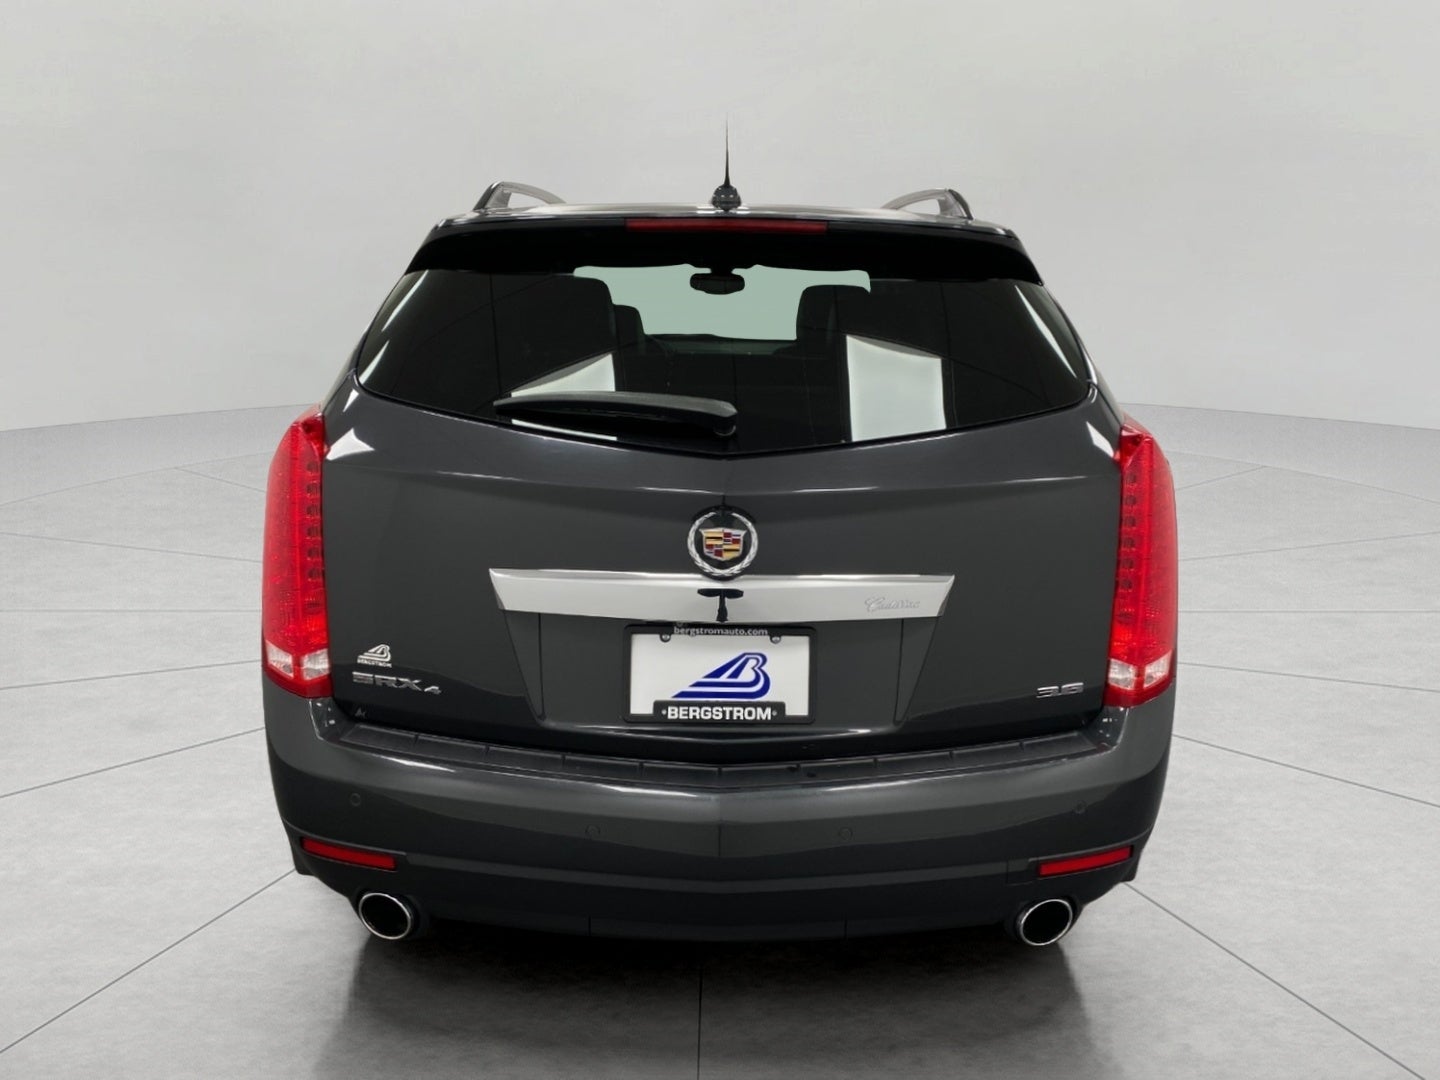 2015 Cadillac SRX AWD 4dr Luxury Collection